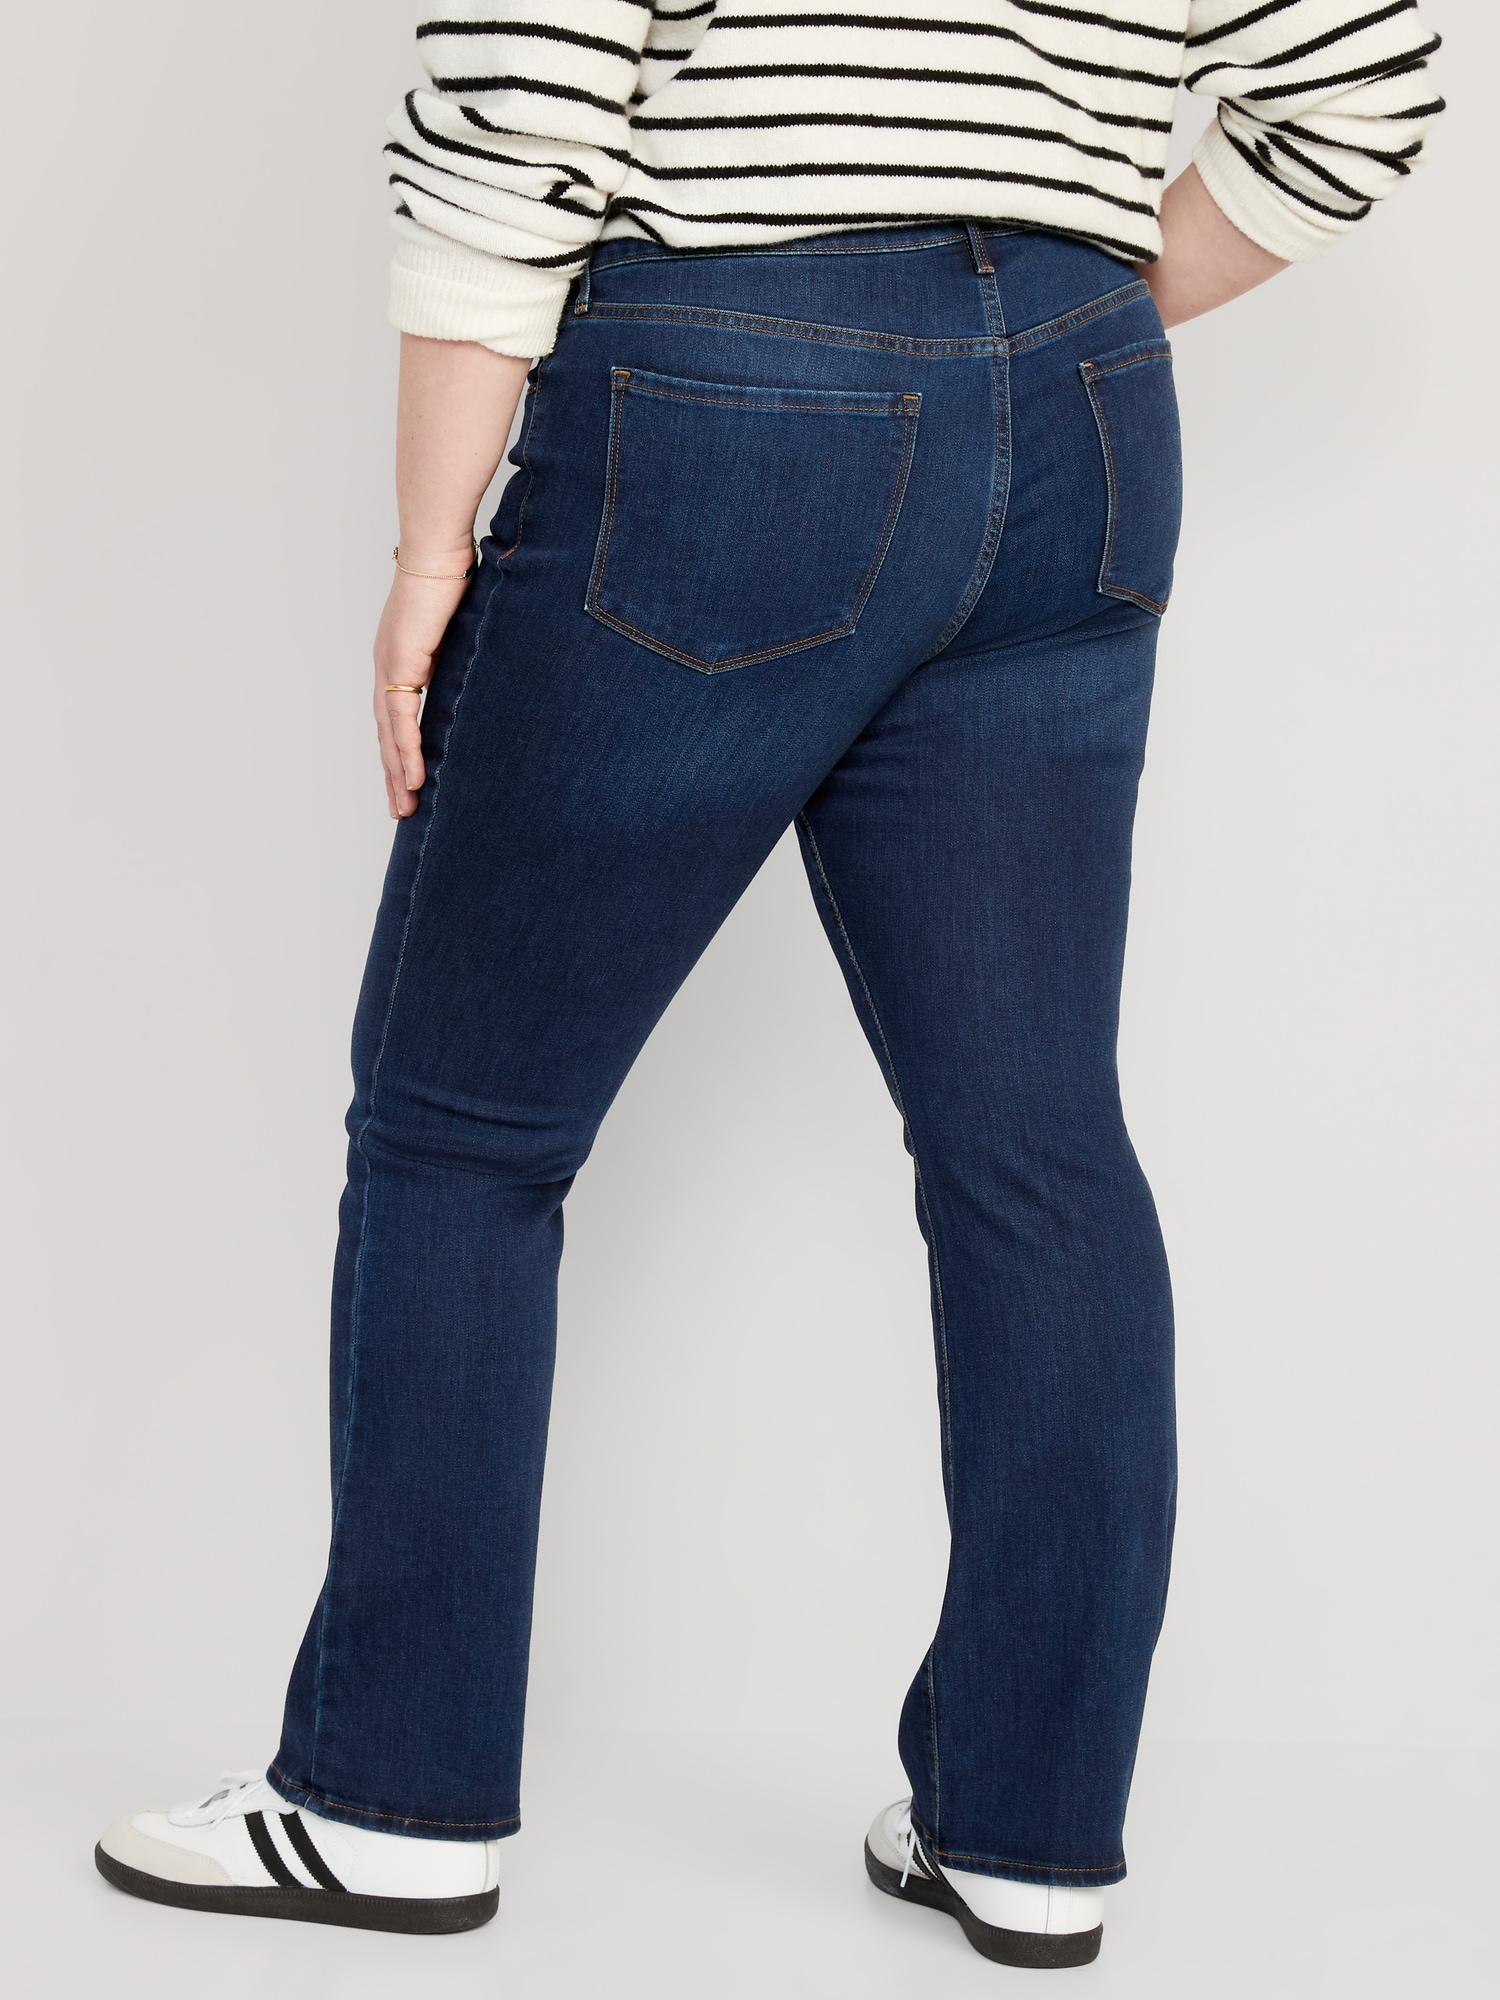 Mid-Rise Kicker Boot-Cut Jeans | Old Navy